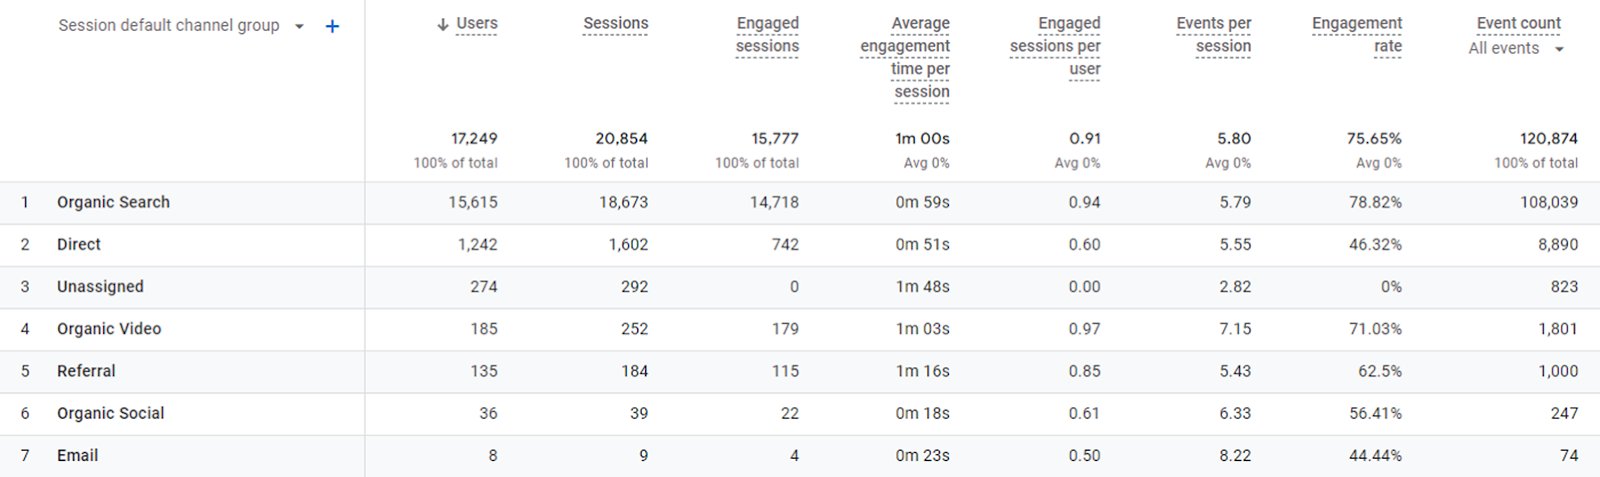 Google Analytics session default channel group